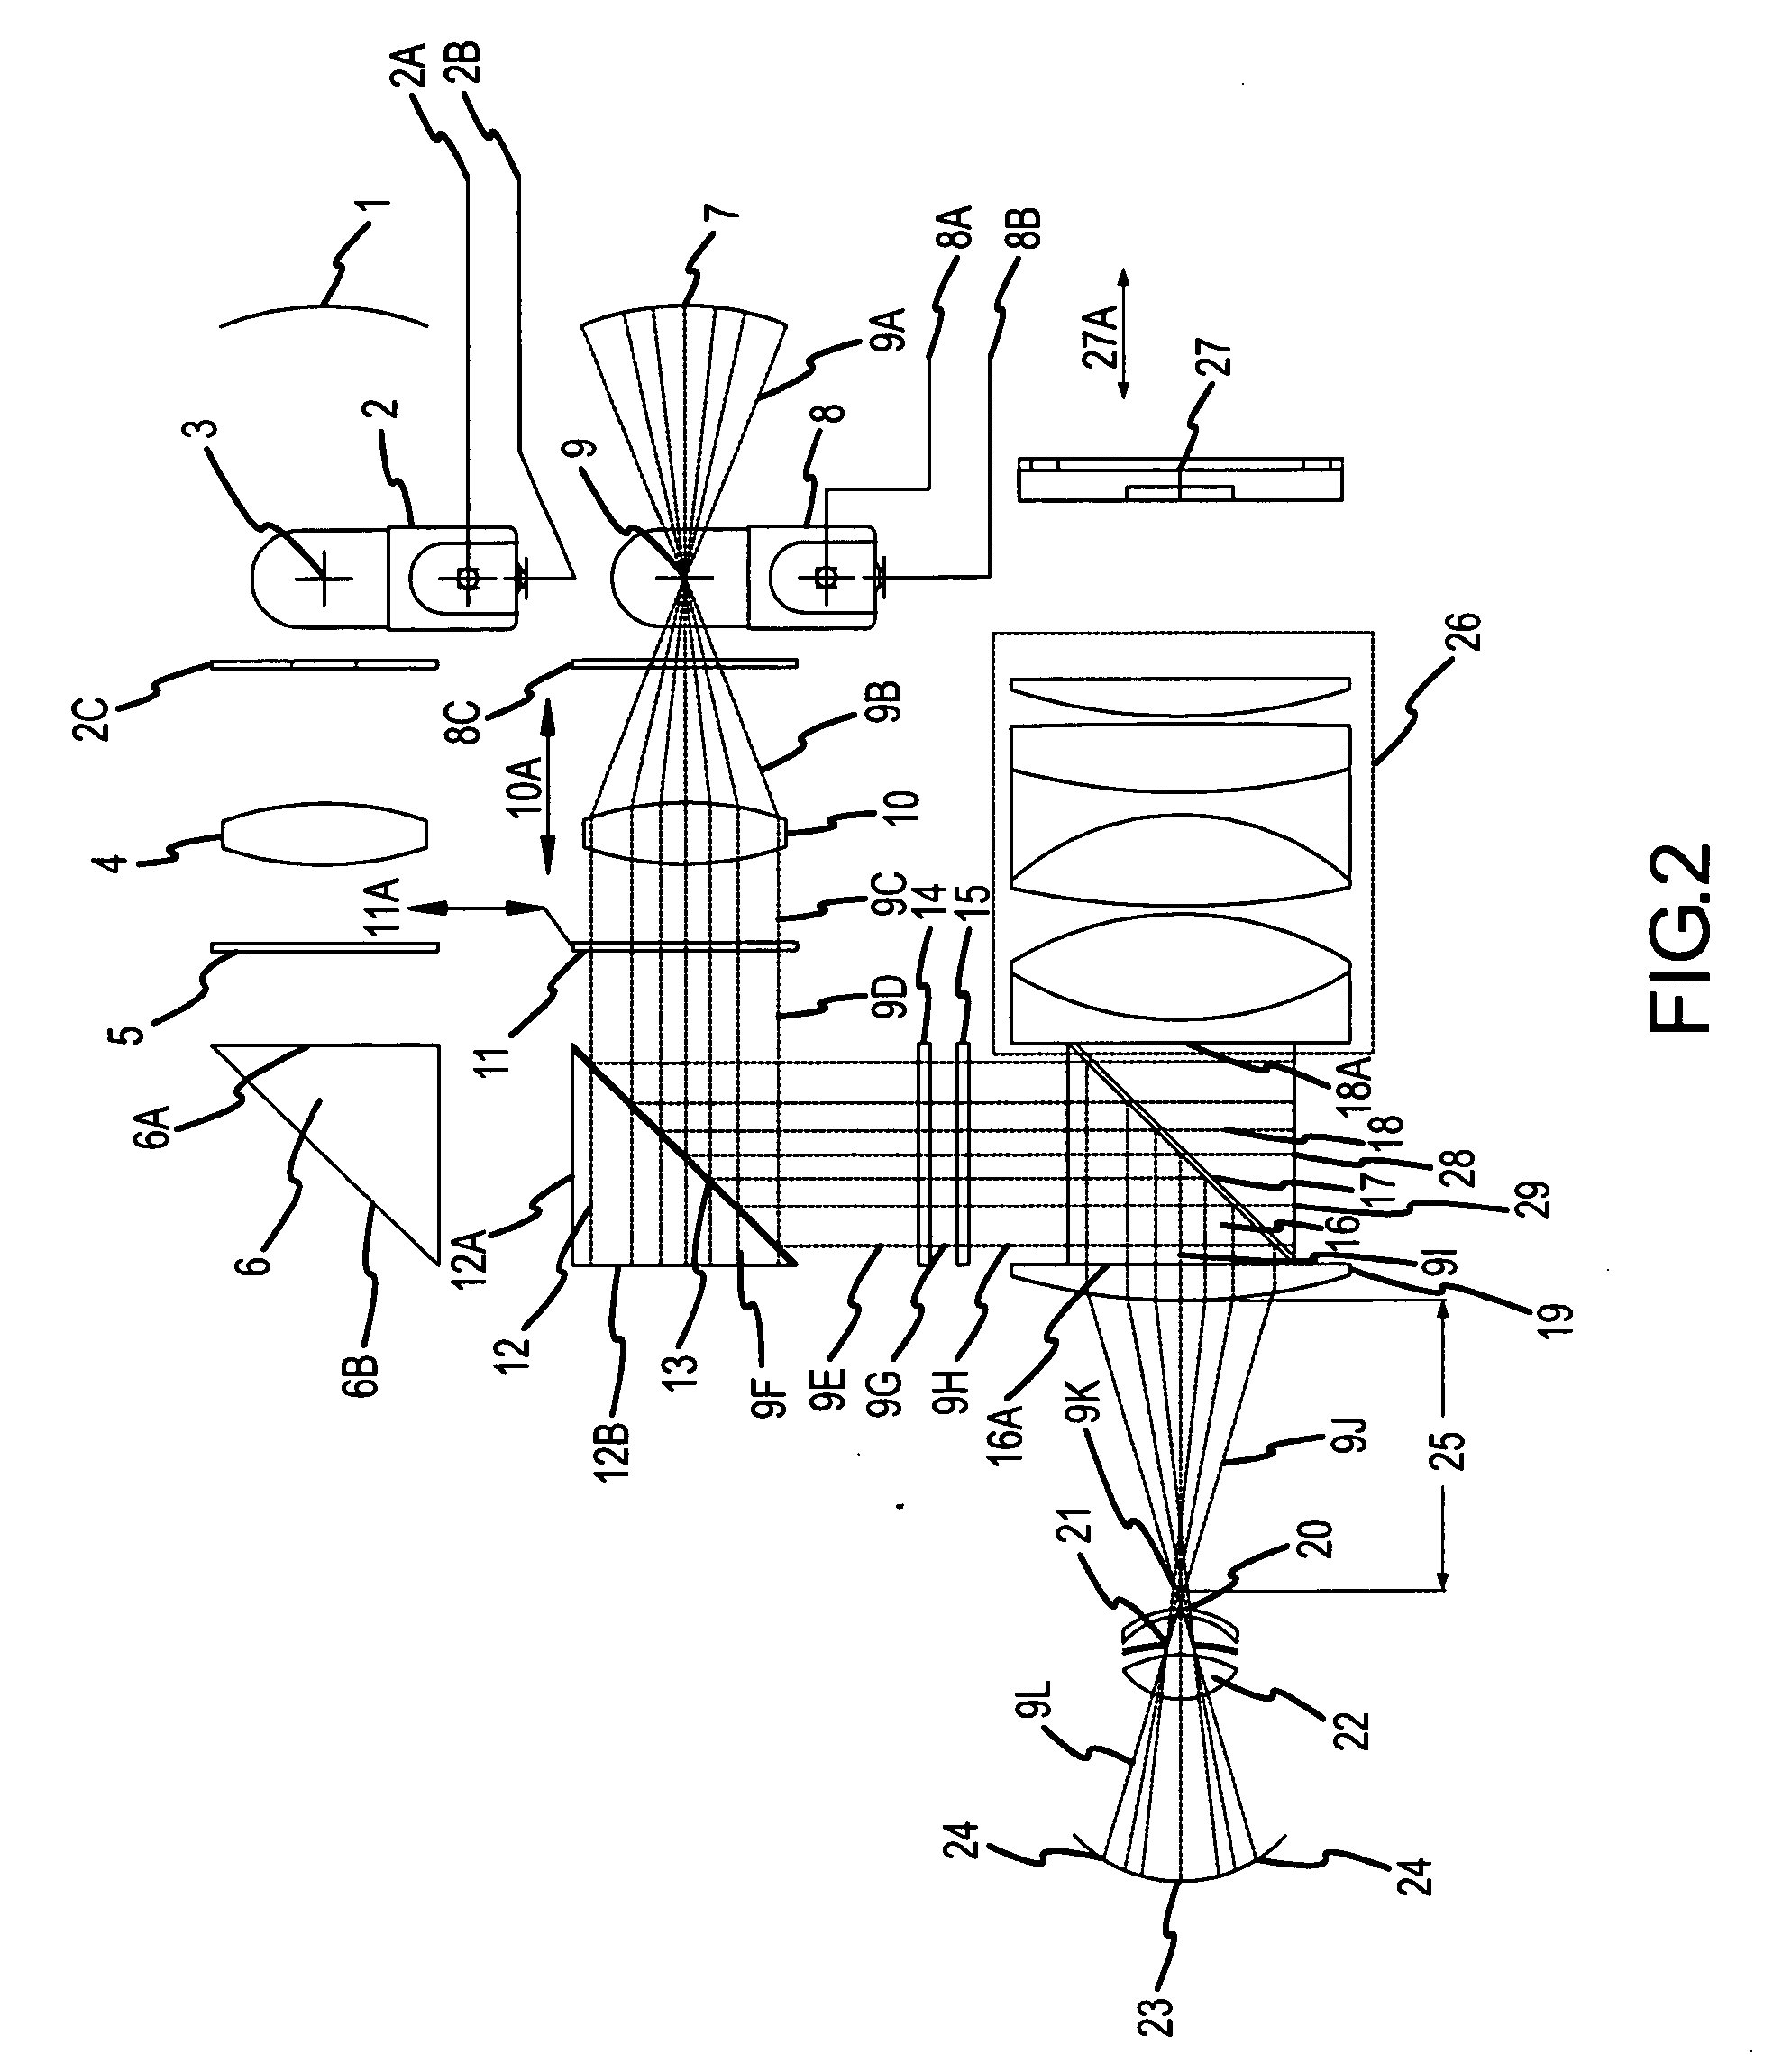 Hand held device and methods for examining a patient's retina